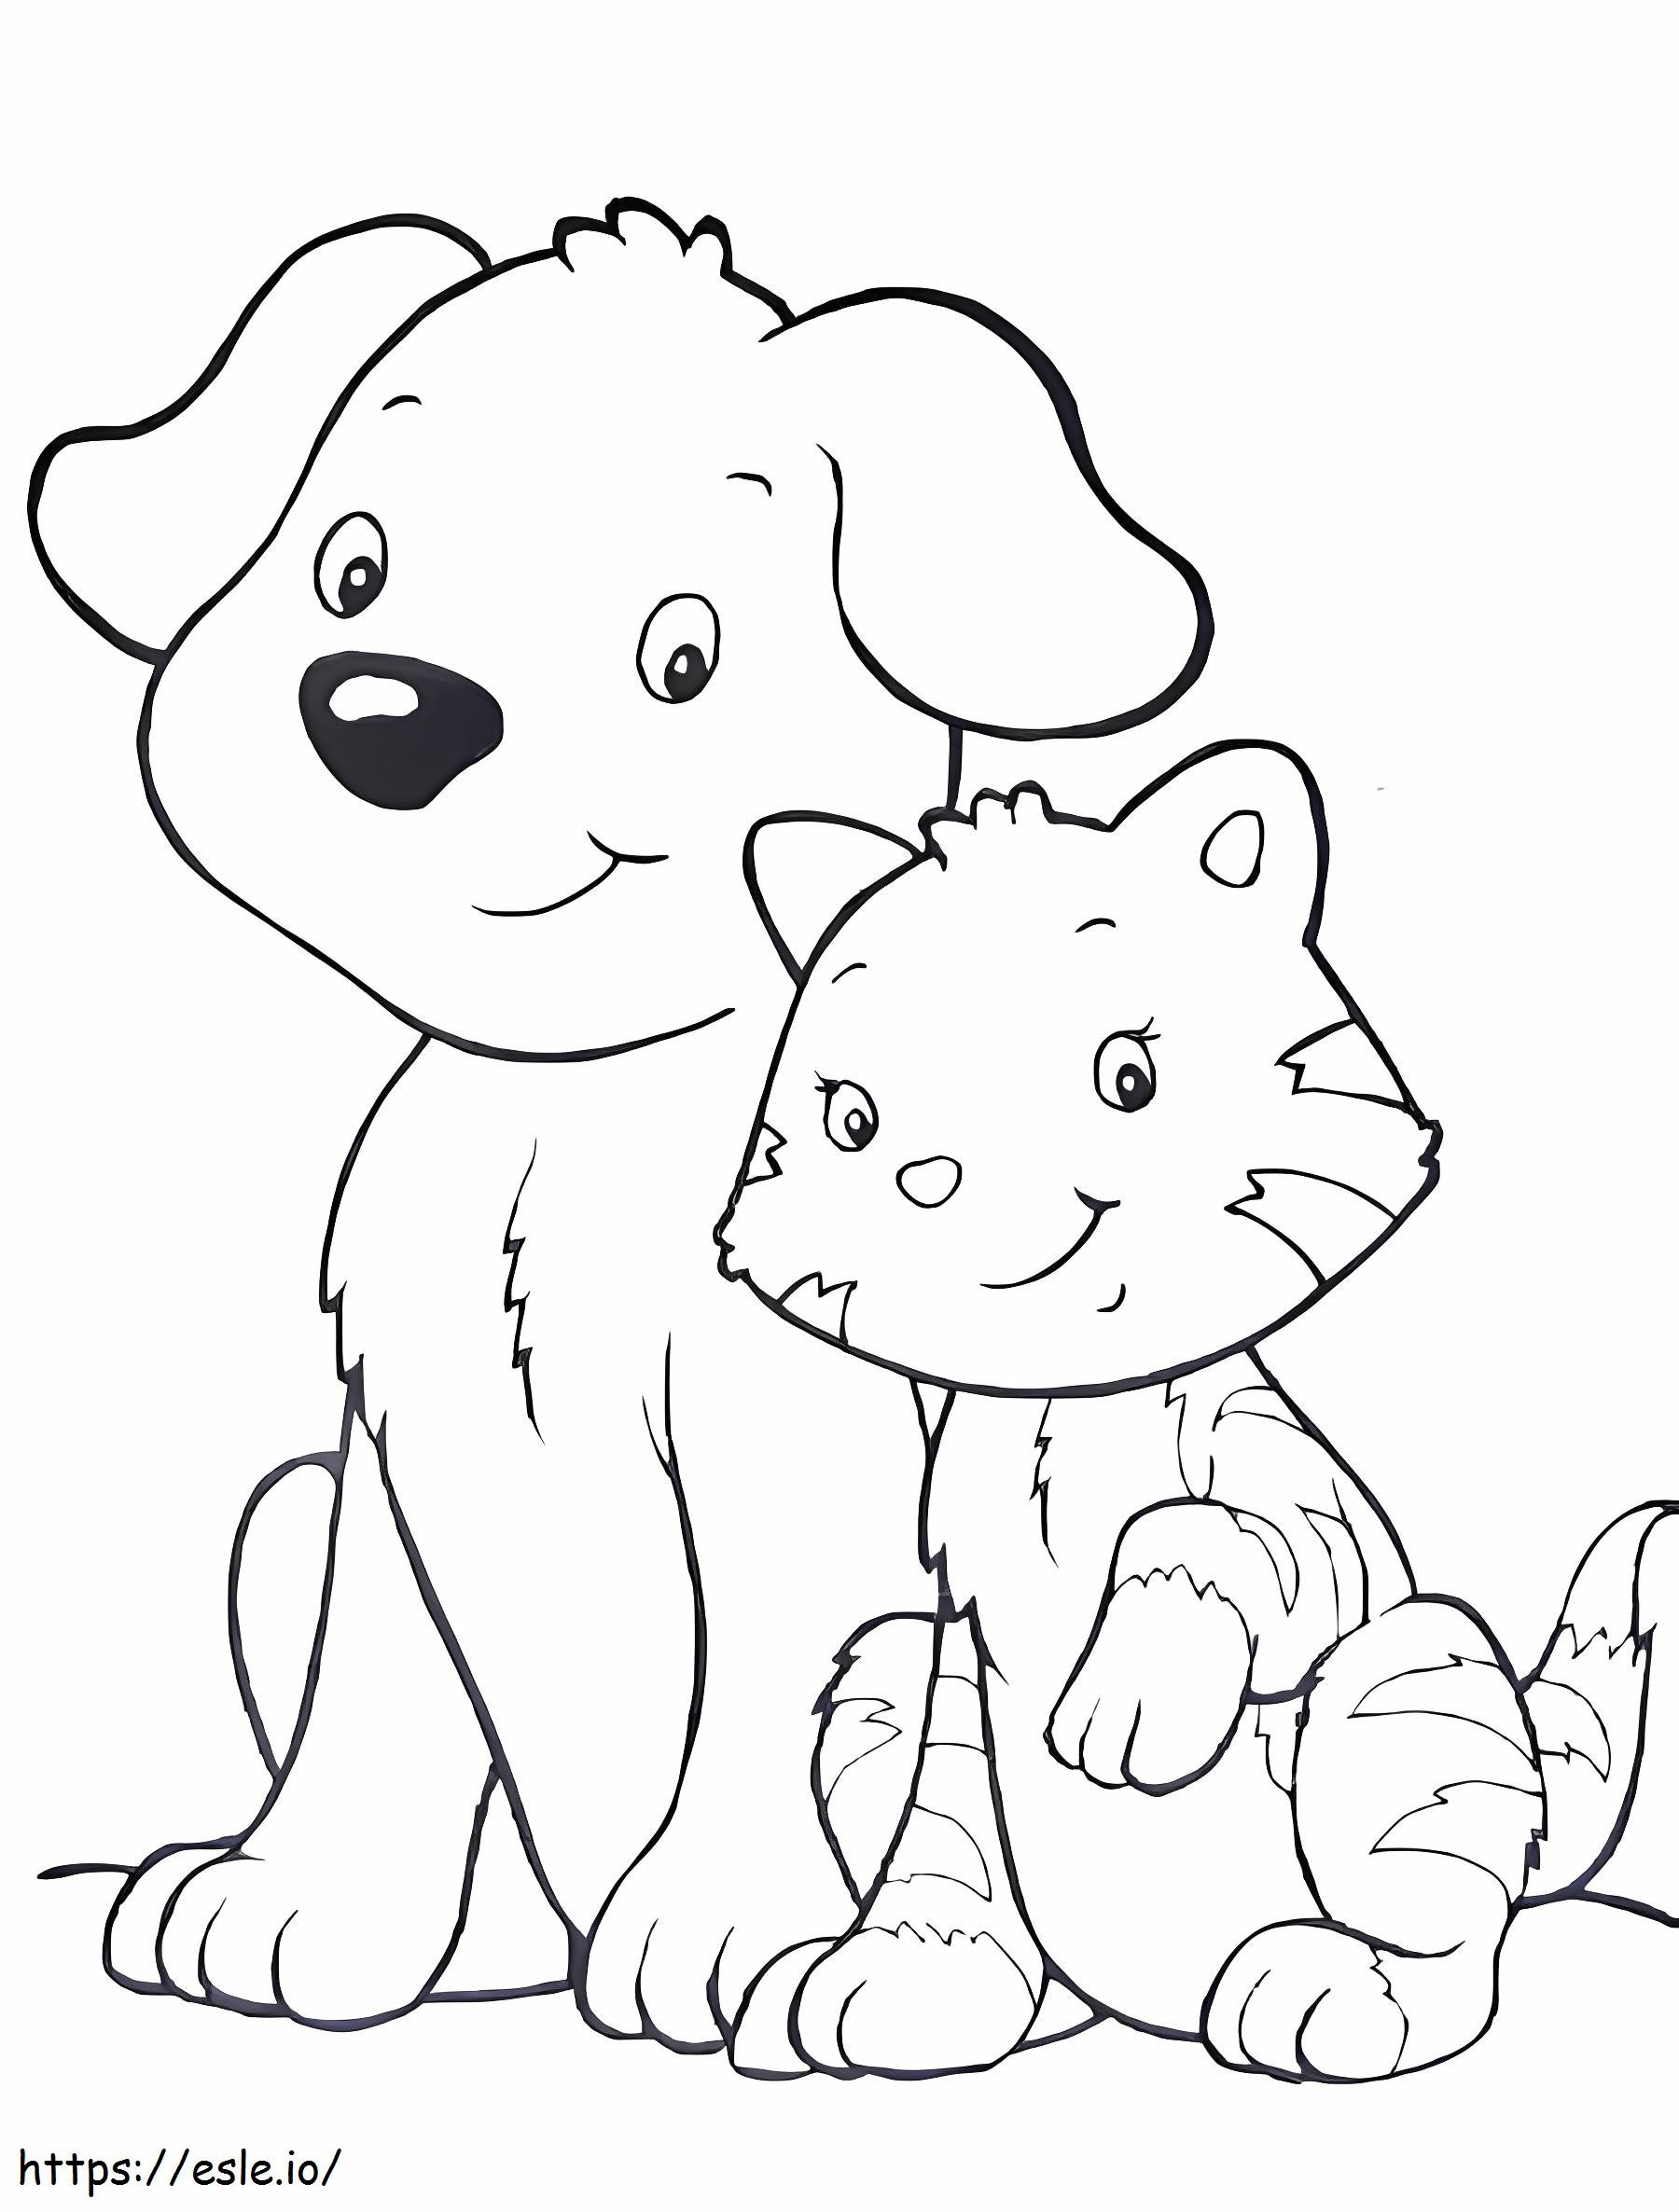 Adorable Dog And Cat coloring page